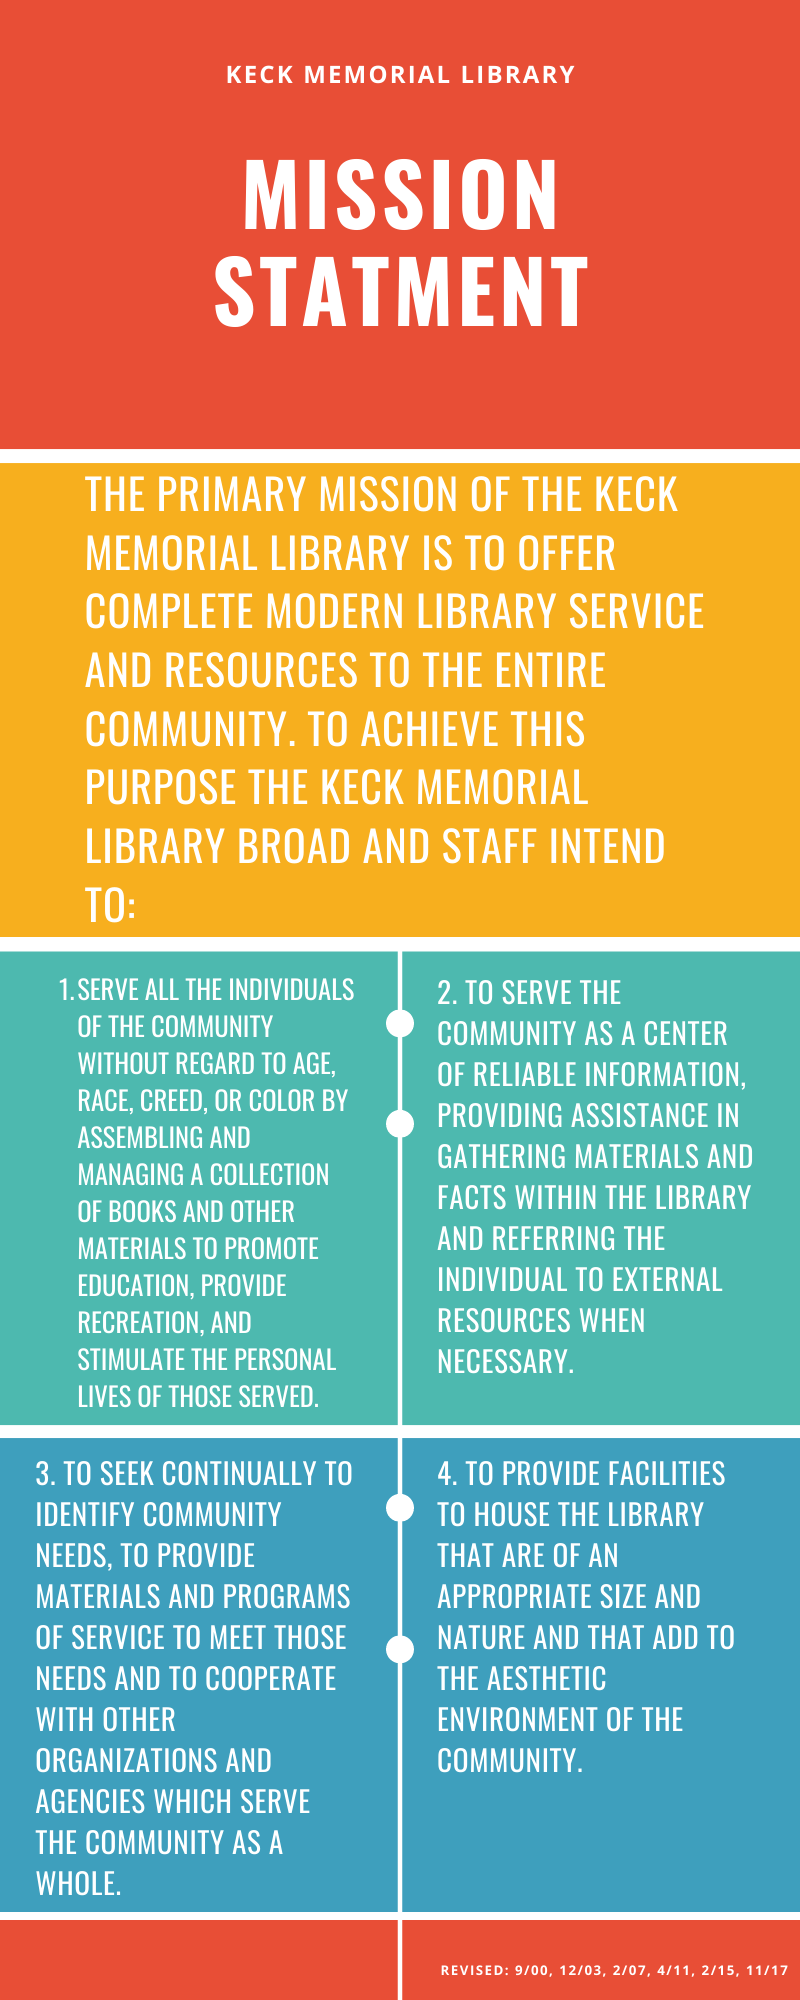 Keck Memorial Library Mission Statement.png